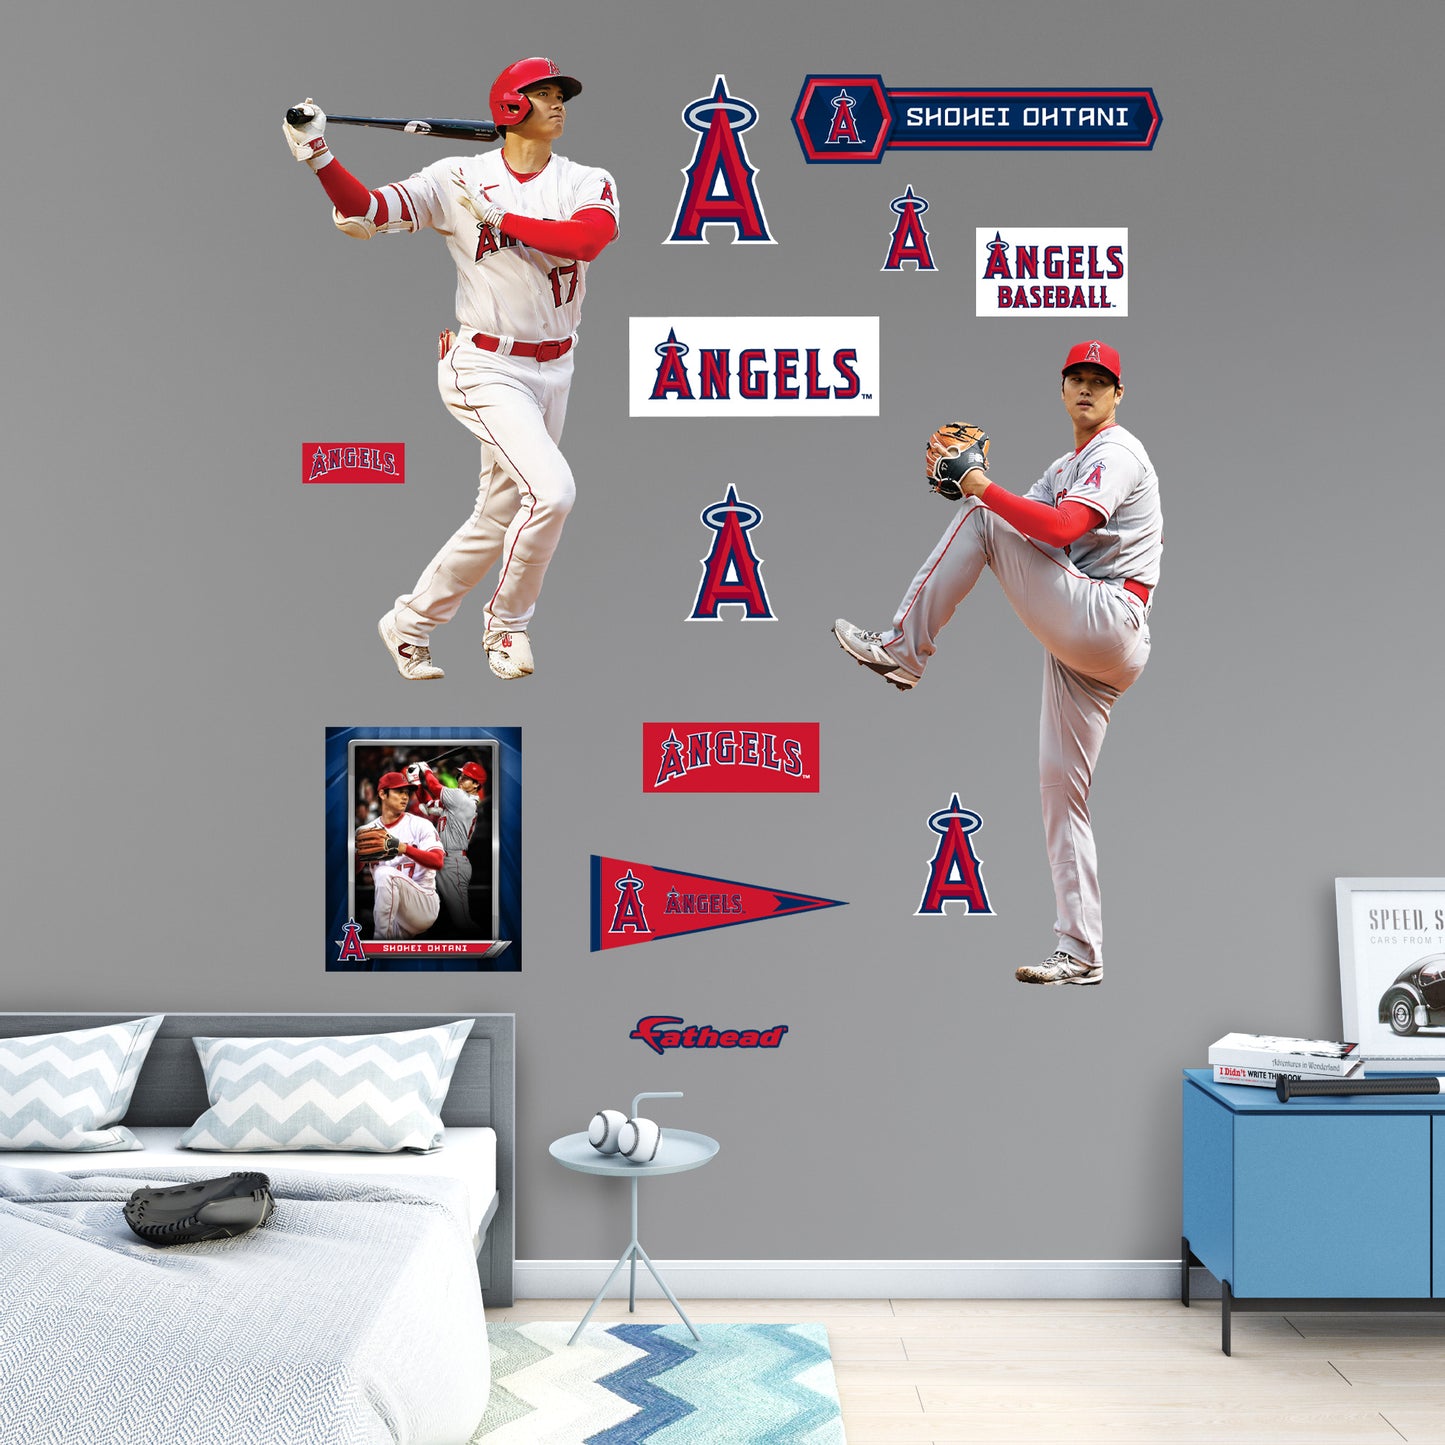 Los Angeles Angels: Shohei Ohtani  Pitching and Hitting Duo        - Officially Licensed MLB Removable     Adhesive Decal